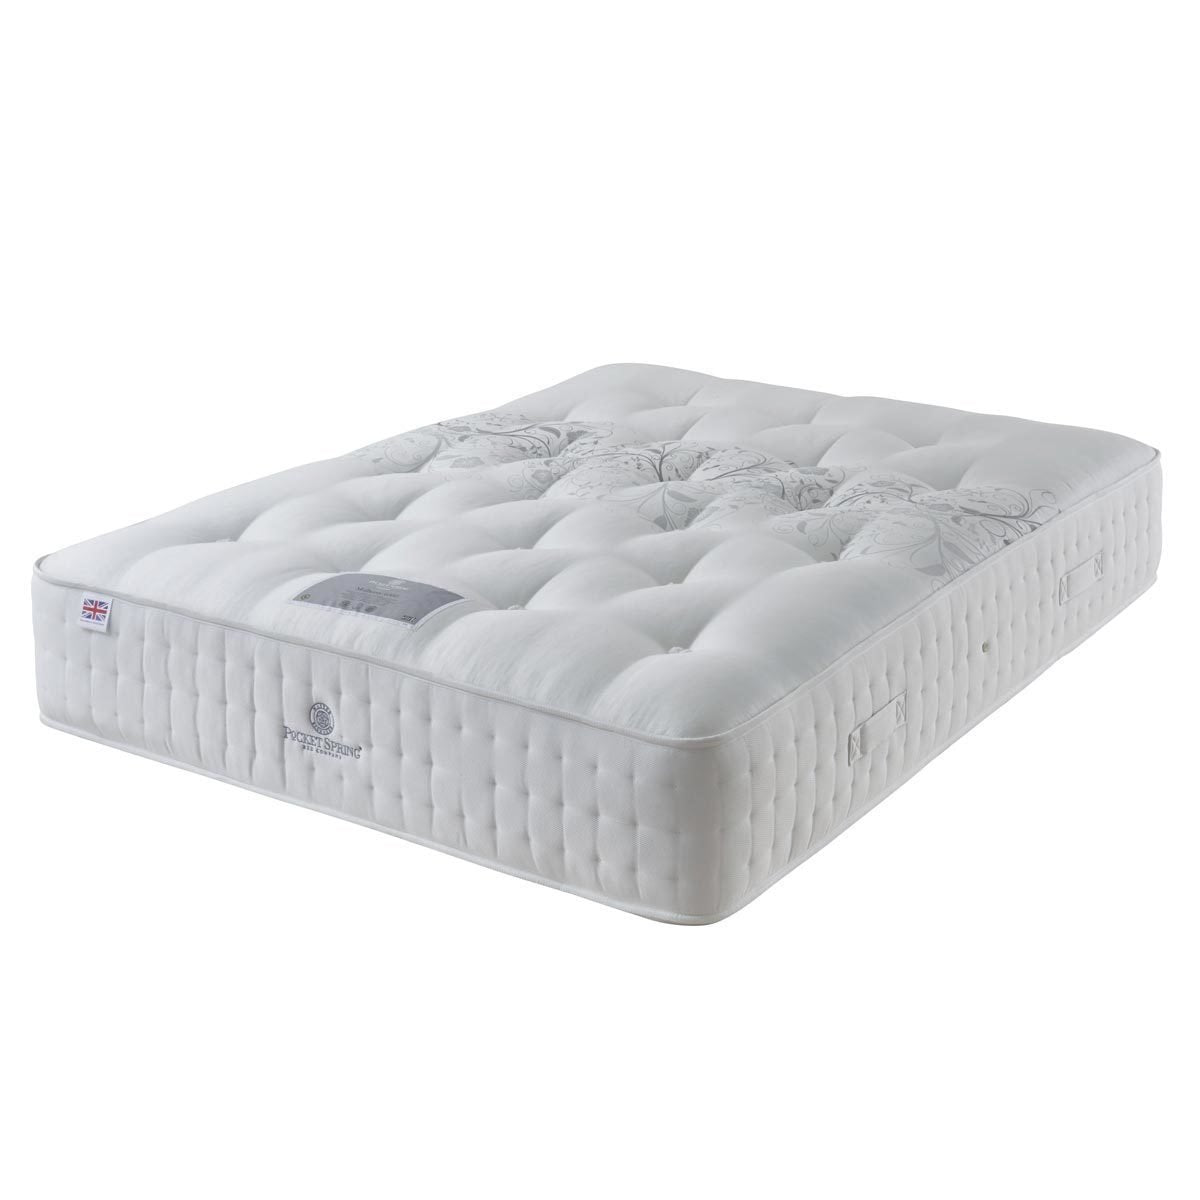 Pocket Spring Bed Company Mulberry Mattress & Fudge Divan with 4 Drawers in 3 Sizes - Signature Retail Stores